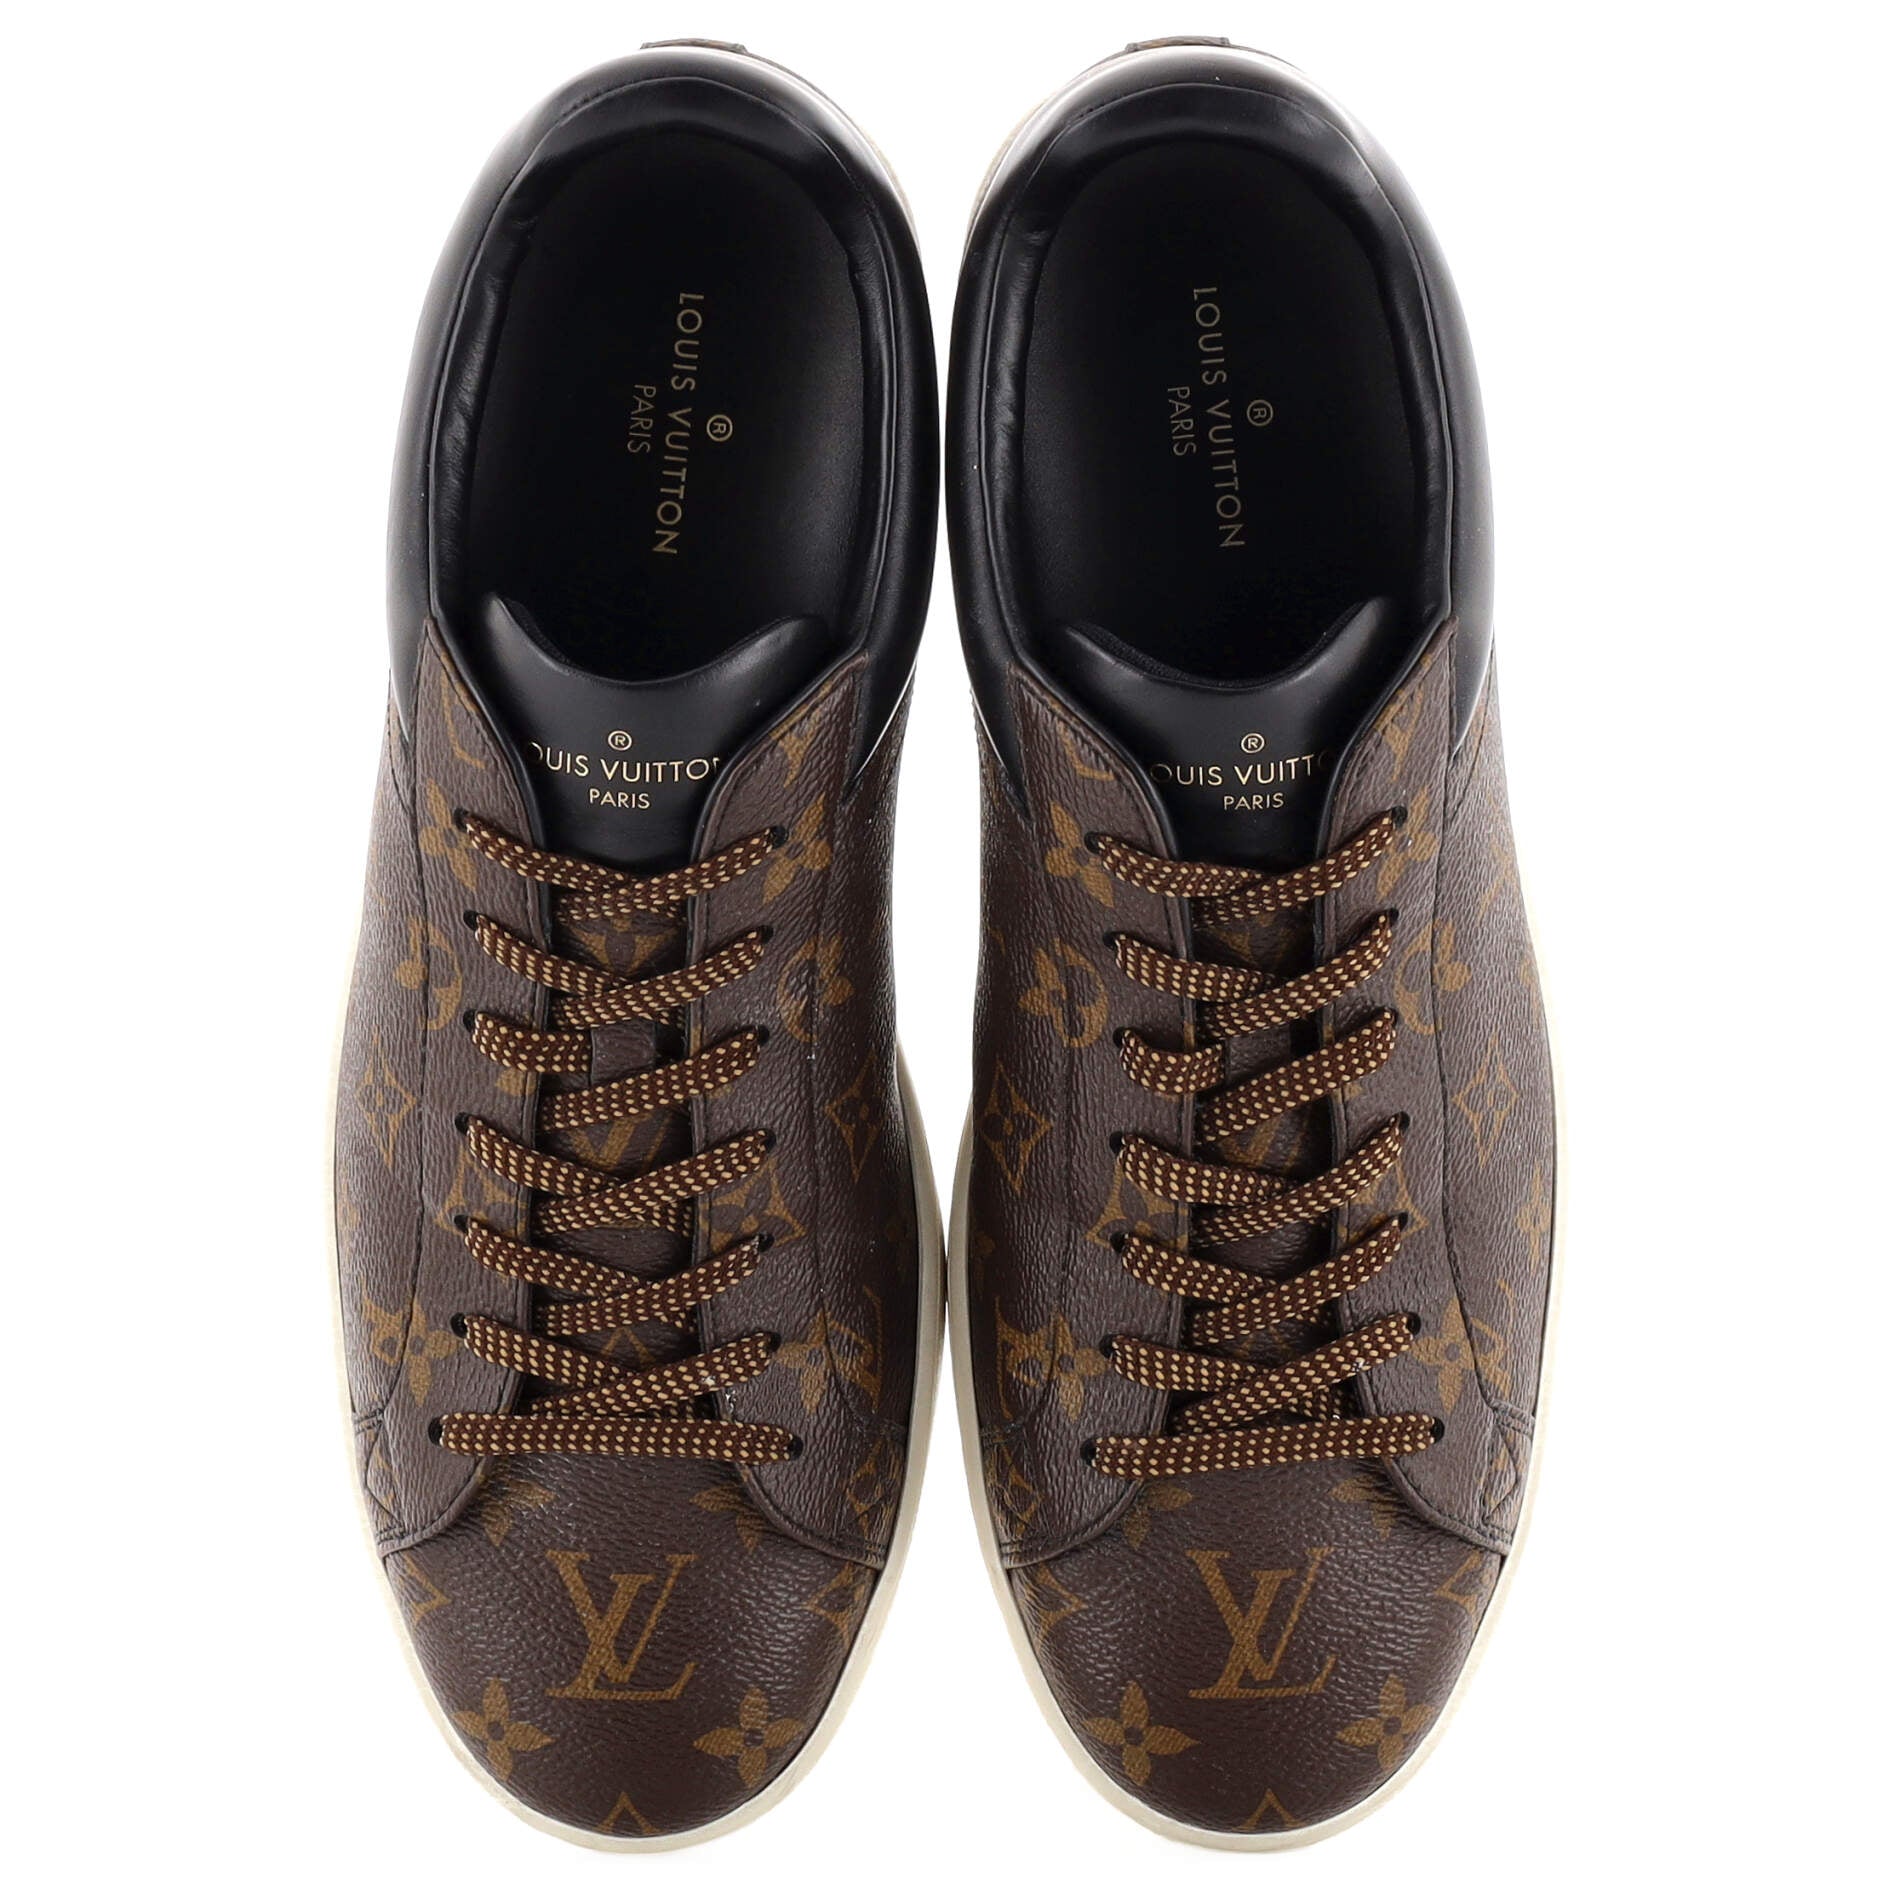 Louis Vuitton Monogram Canvas Luxembourg Low Top Sneakers Size 44